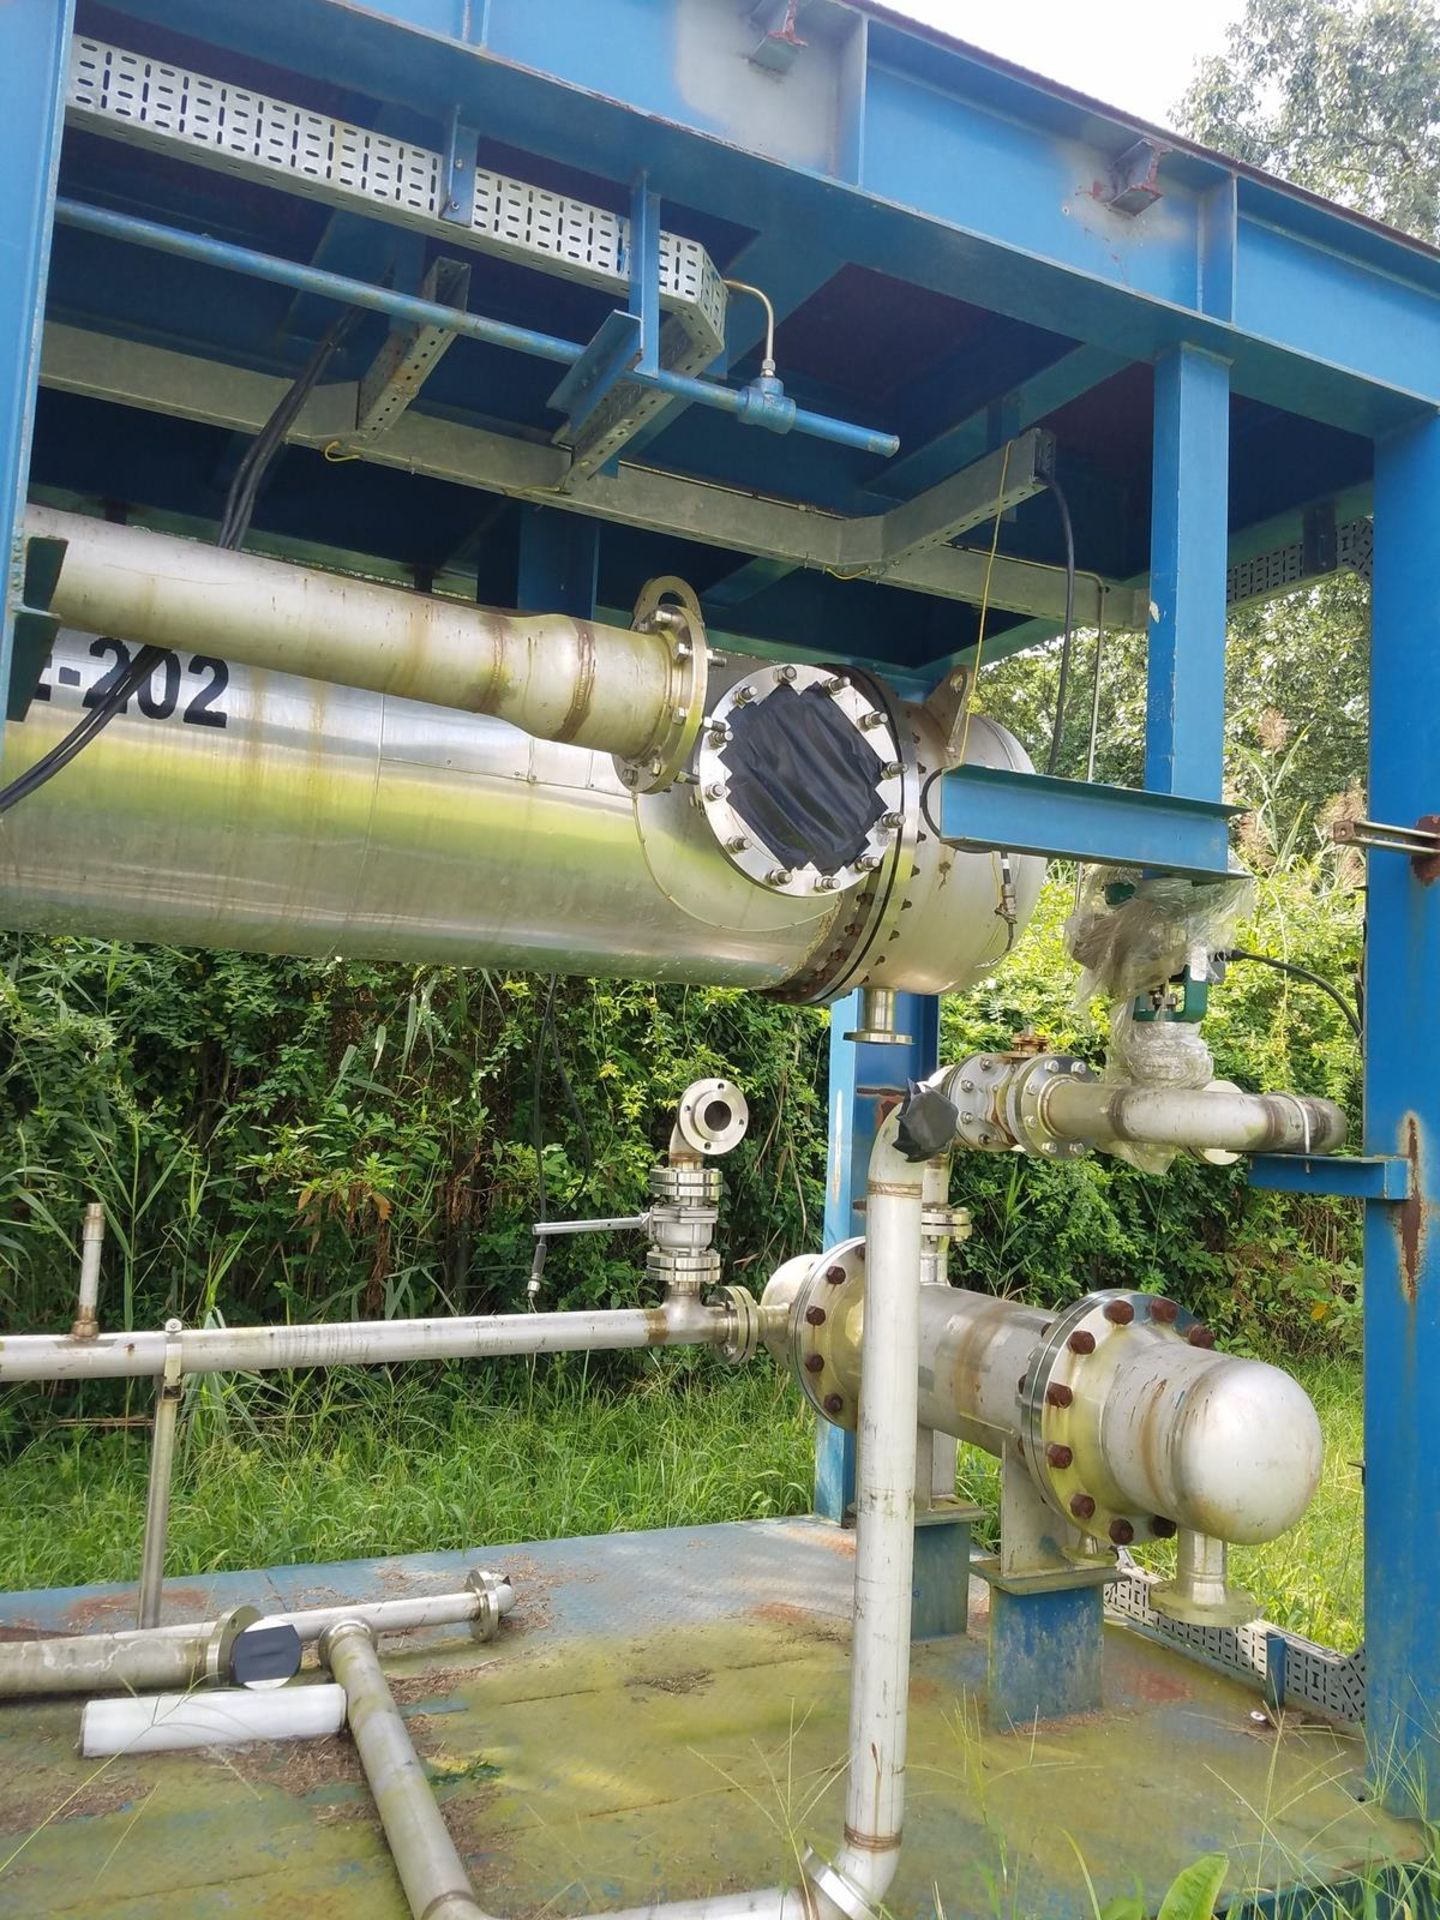 Heat Exchanger Skid / Heat Recovery Condenser, Stainless Steel, Tube Side 0.40 M | Rig Fee: $2500 - Image 2 of 4